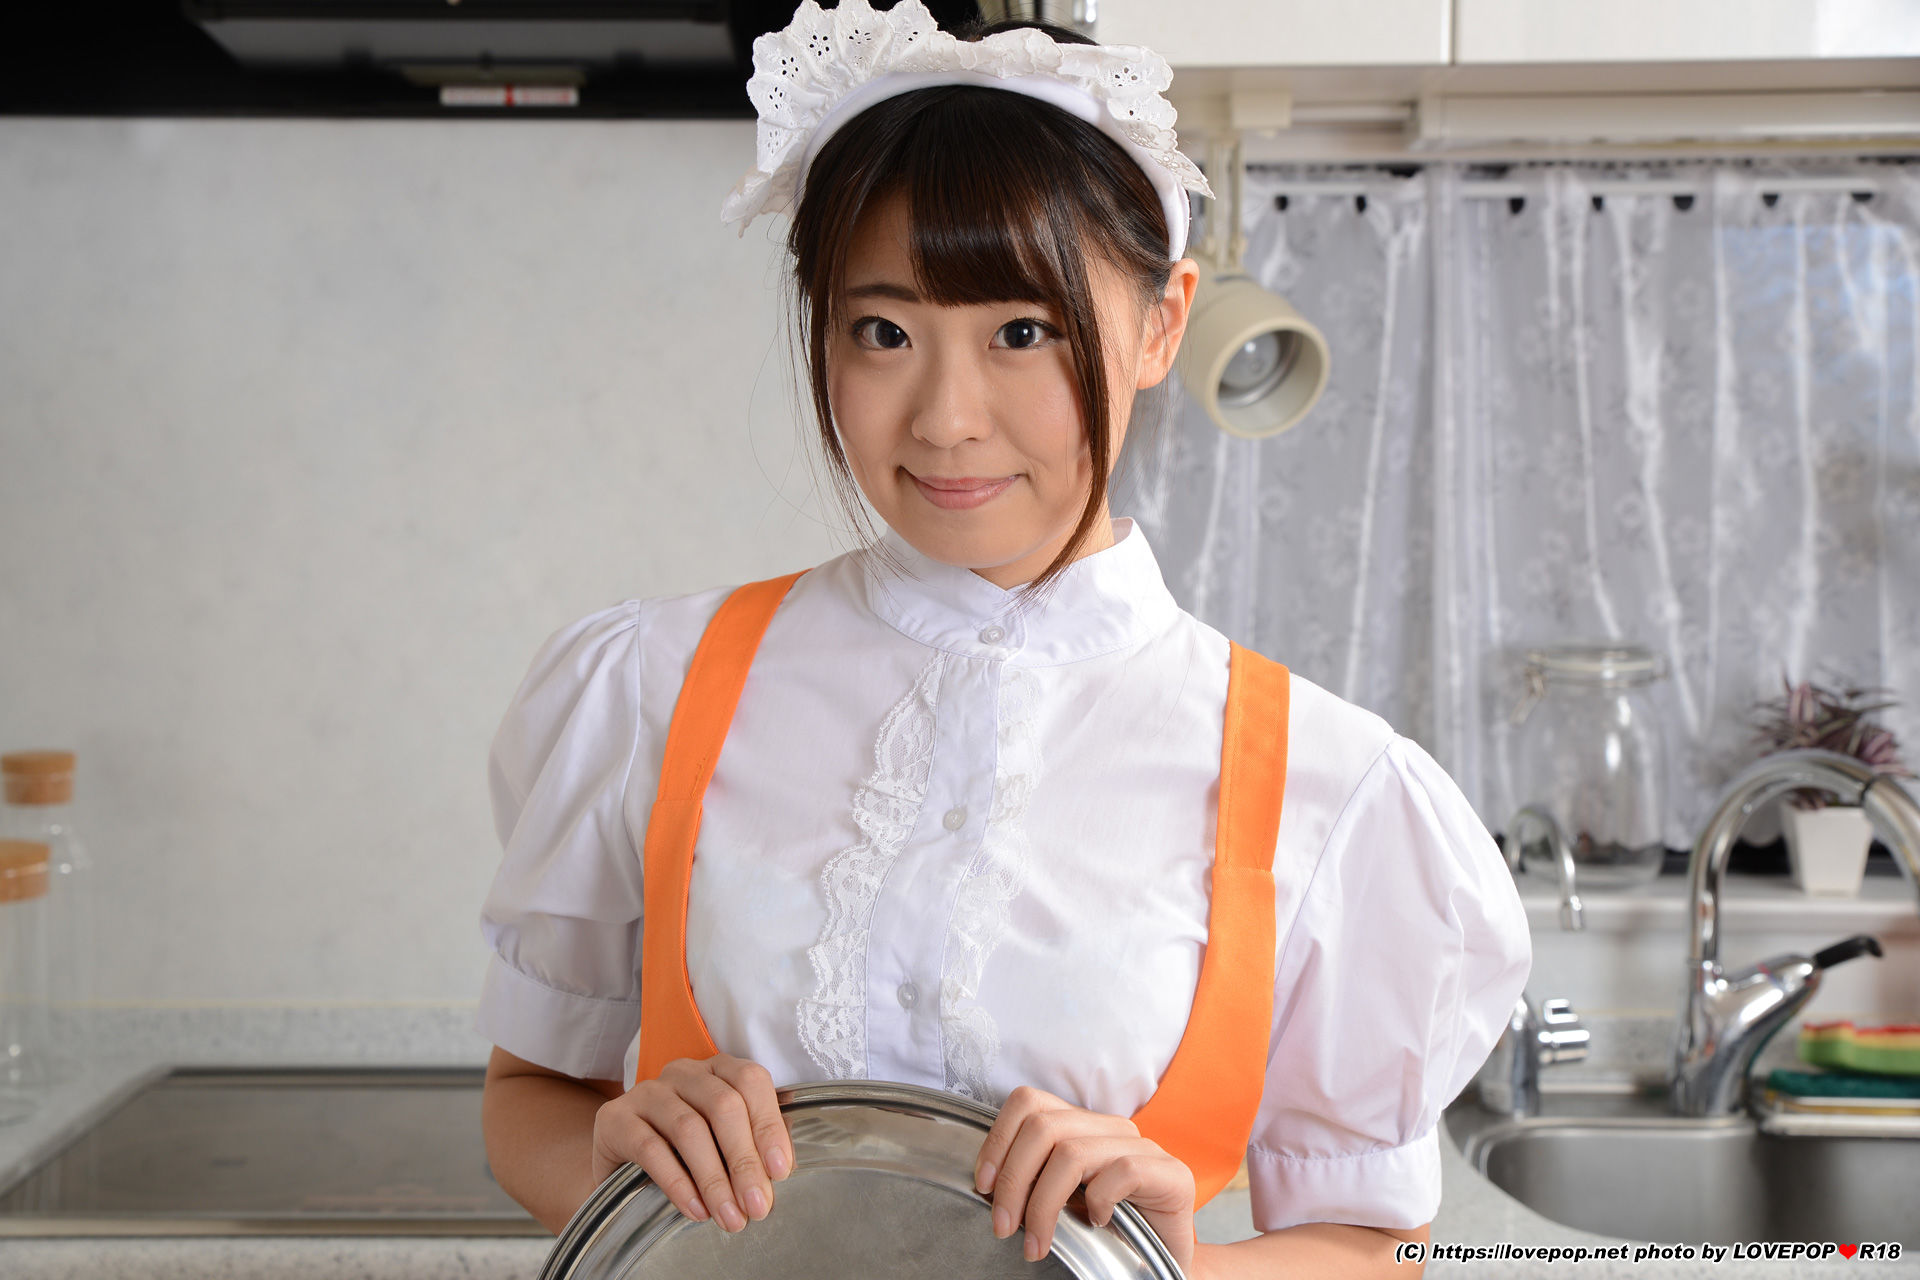 [LOVEPOP] Special Maid Collection - Airi Satou さとう愛理 Photoset 05